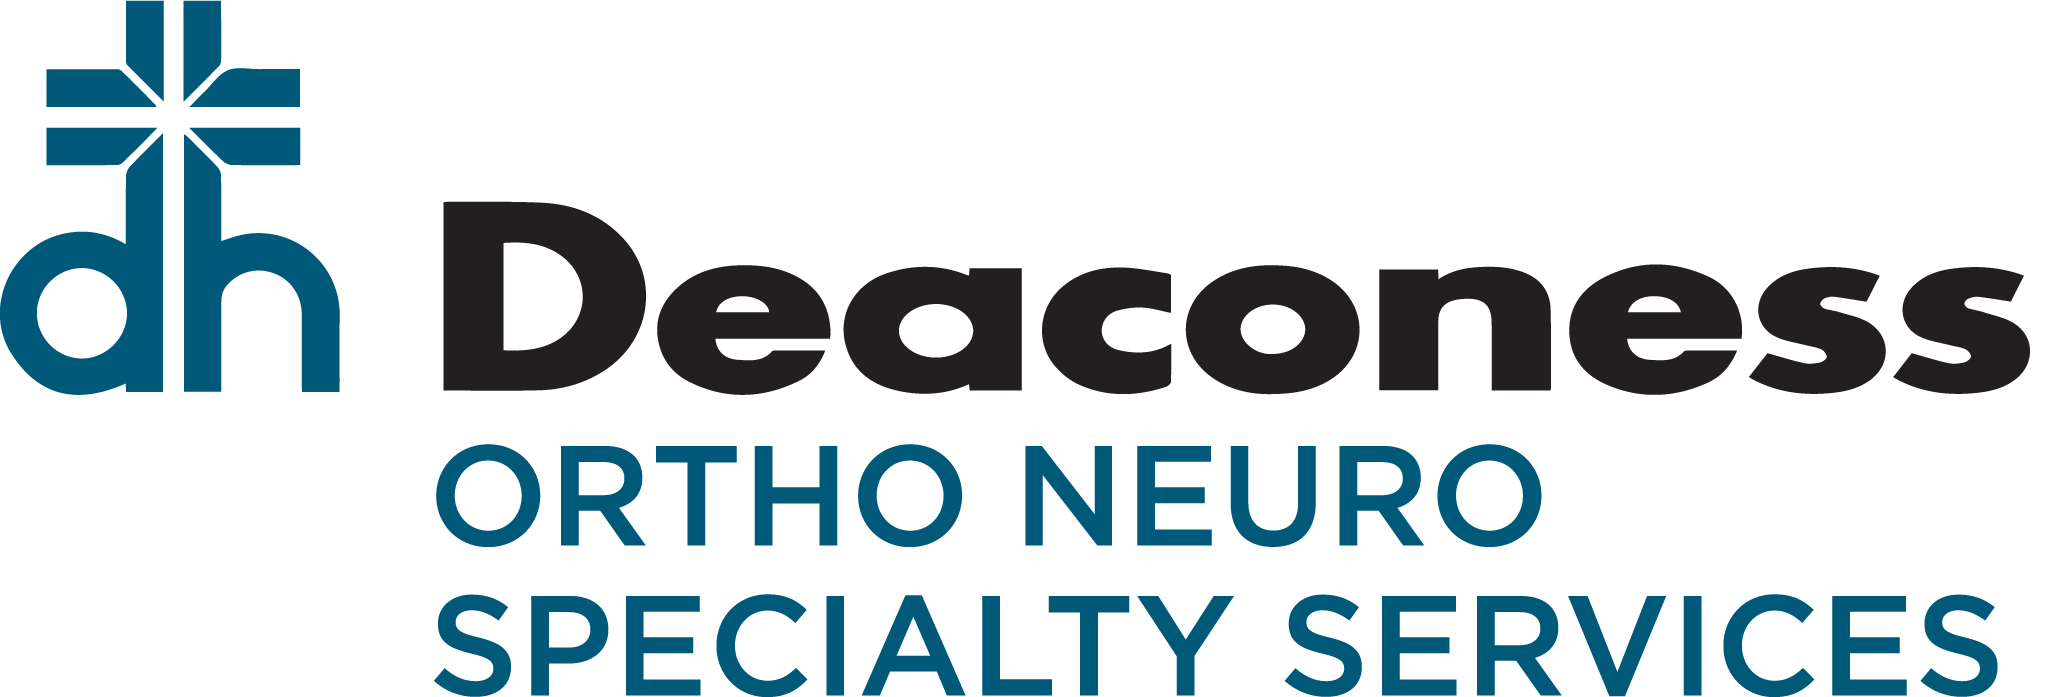 Deaconess Ortho Neuro Specialty Services